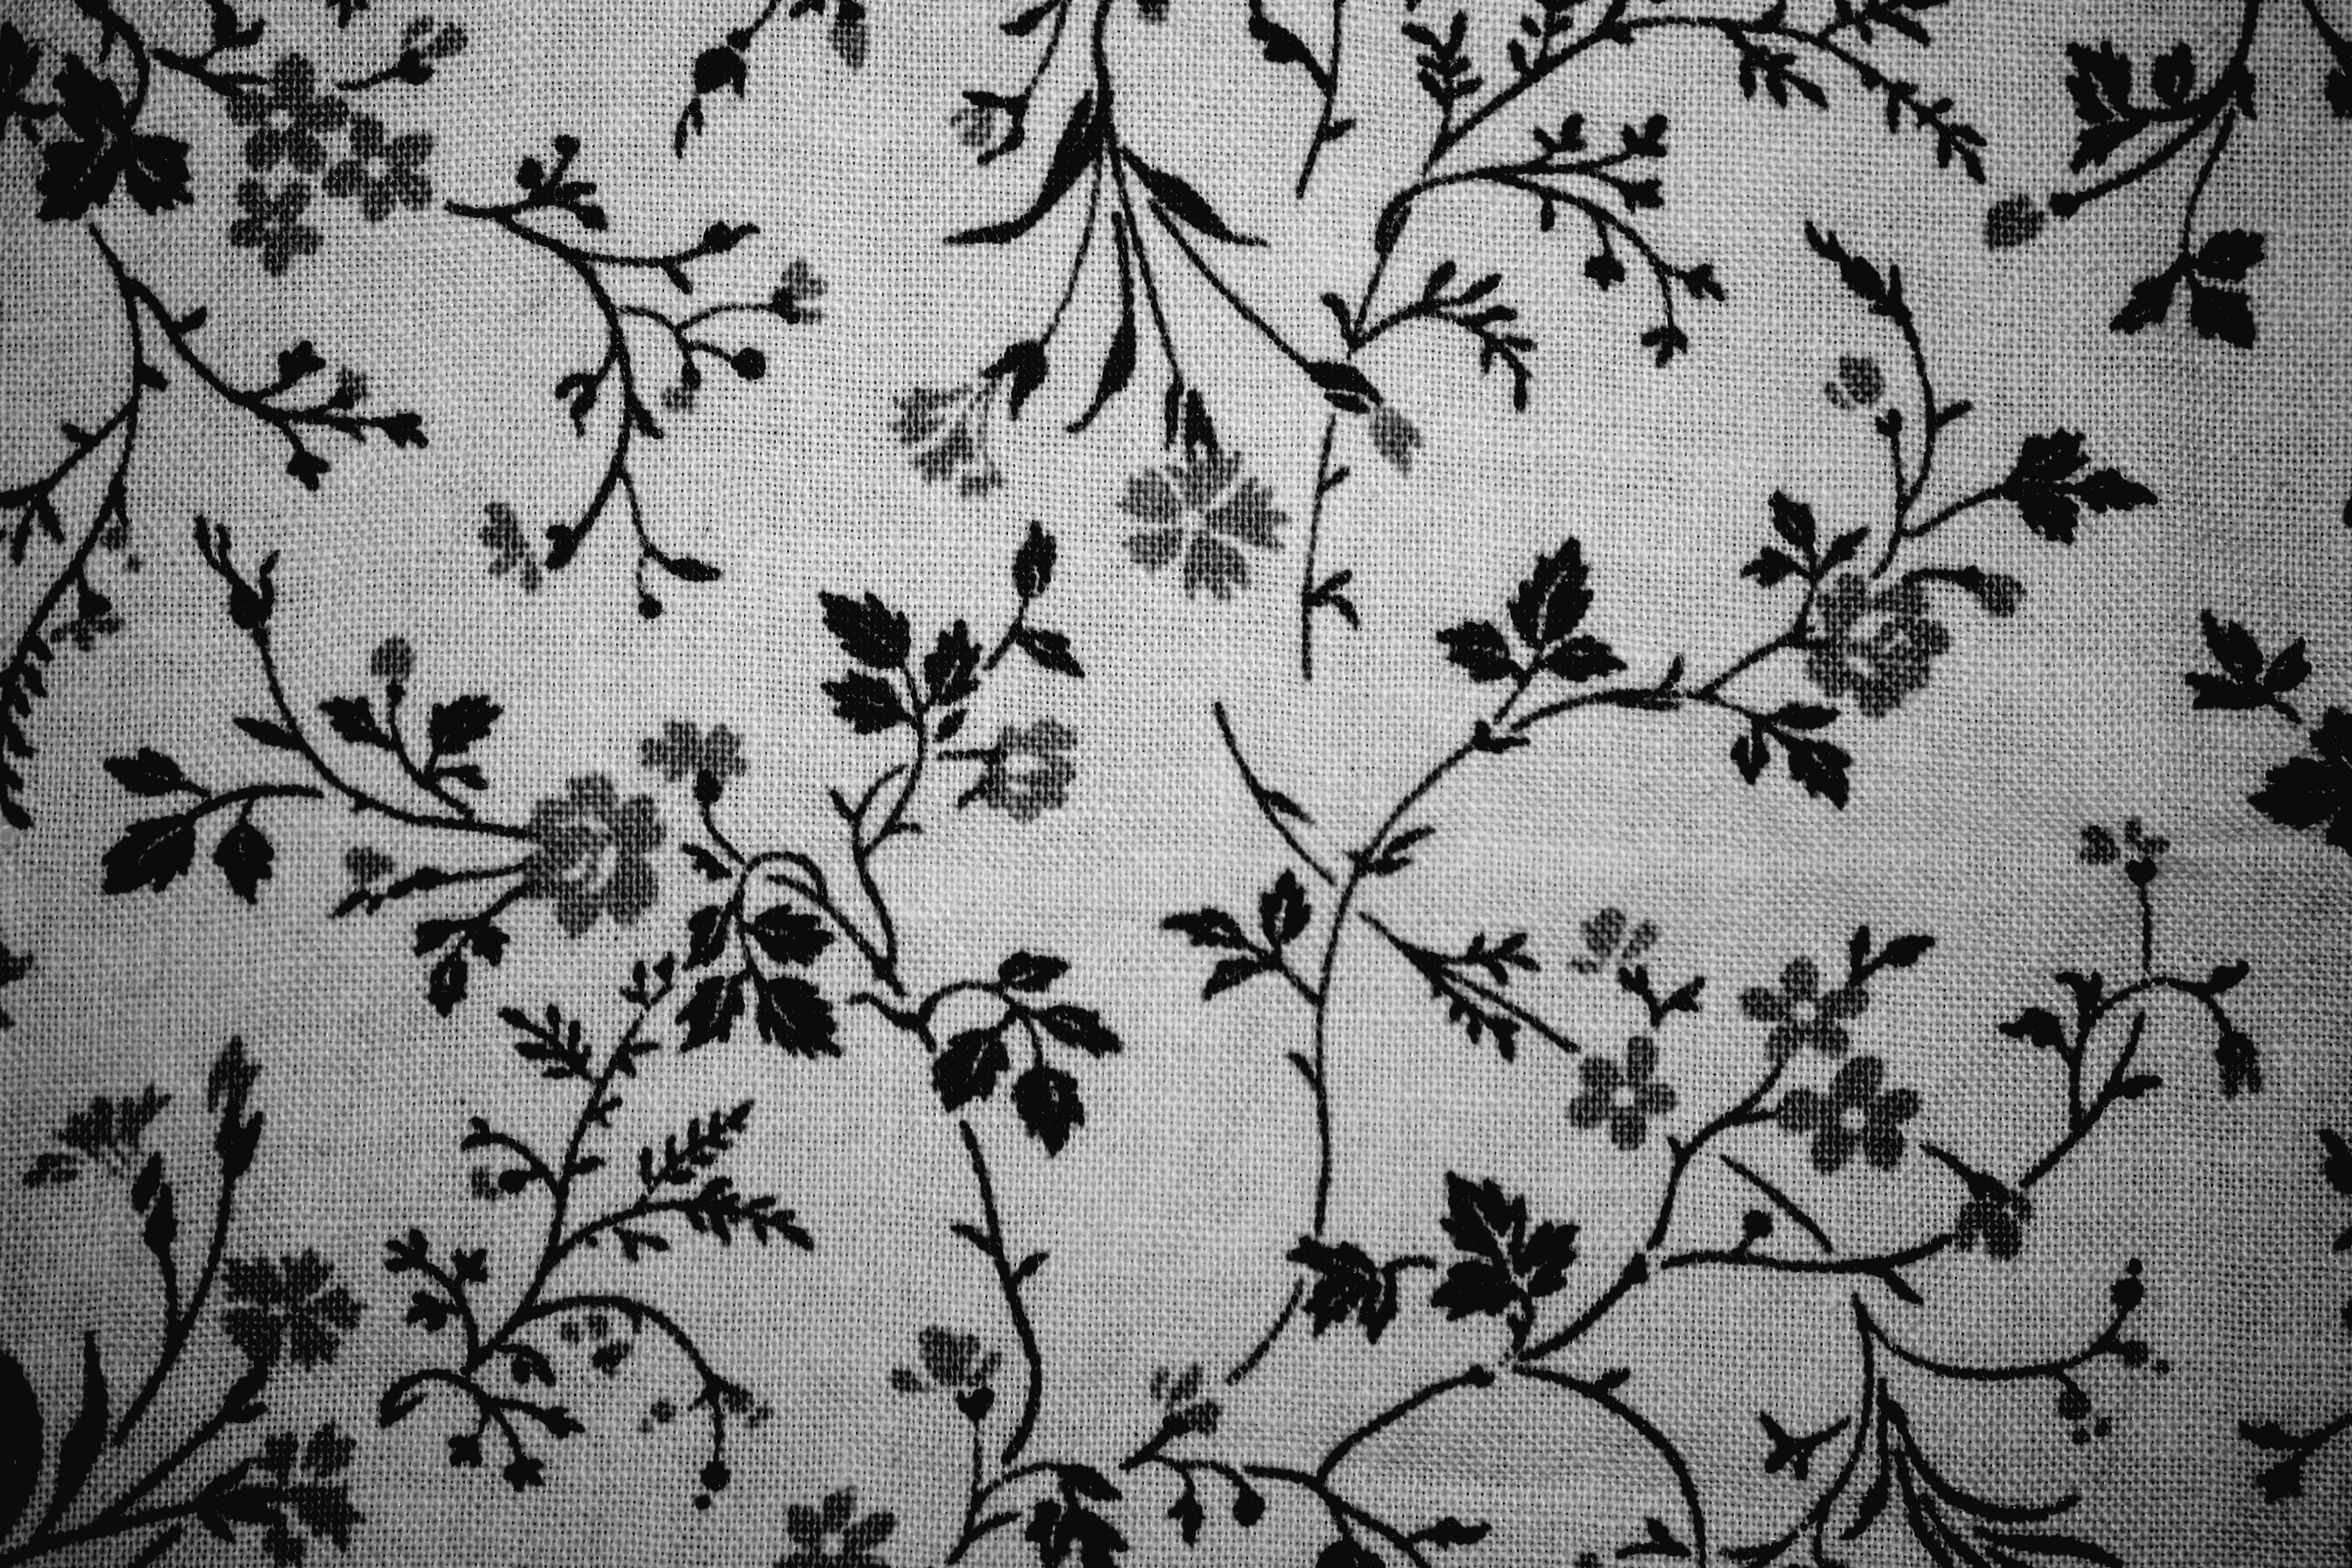 Black On White Floral Print Fabric Texture Picture Photograph